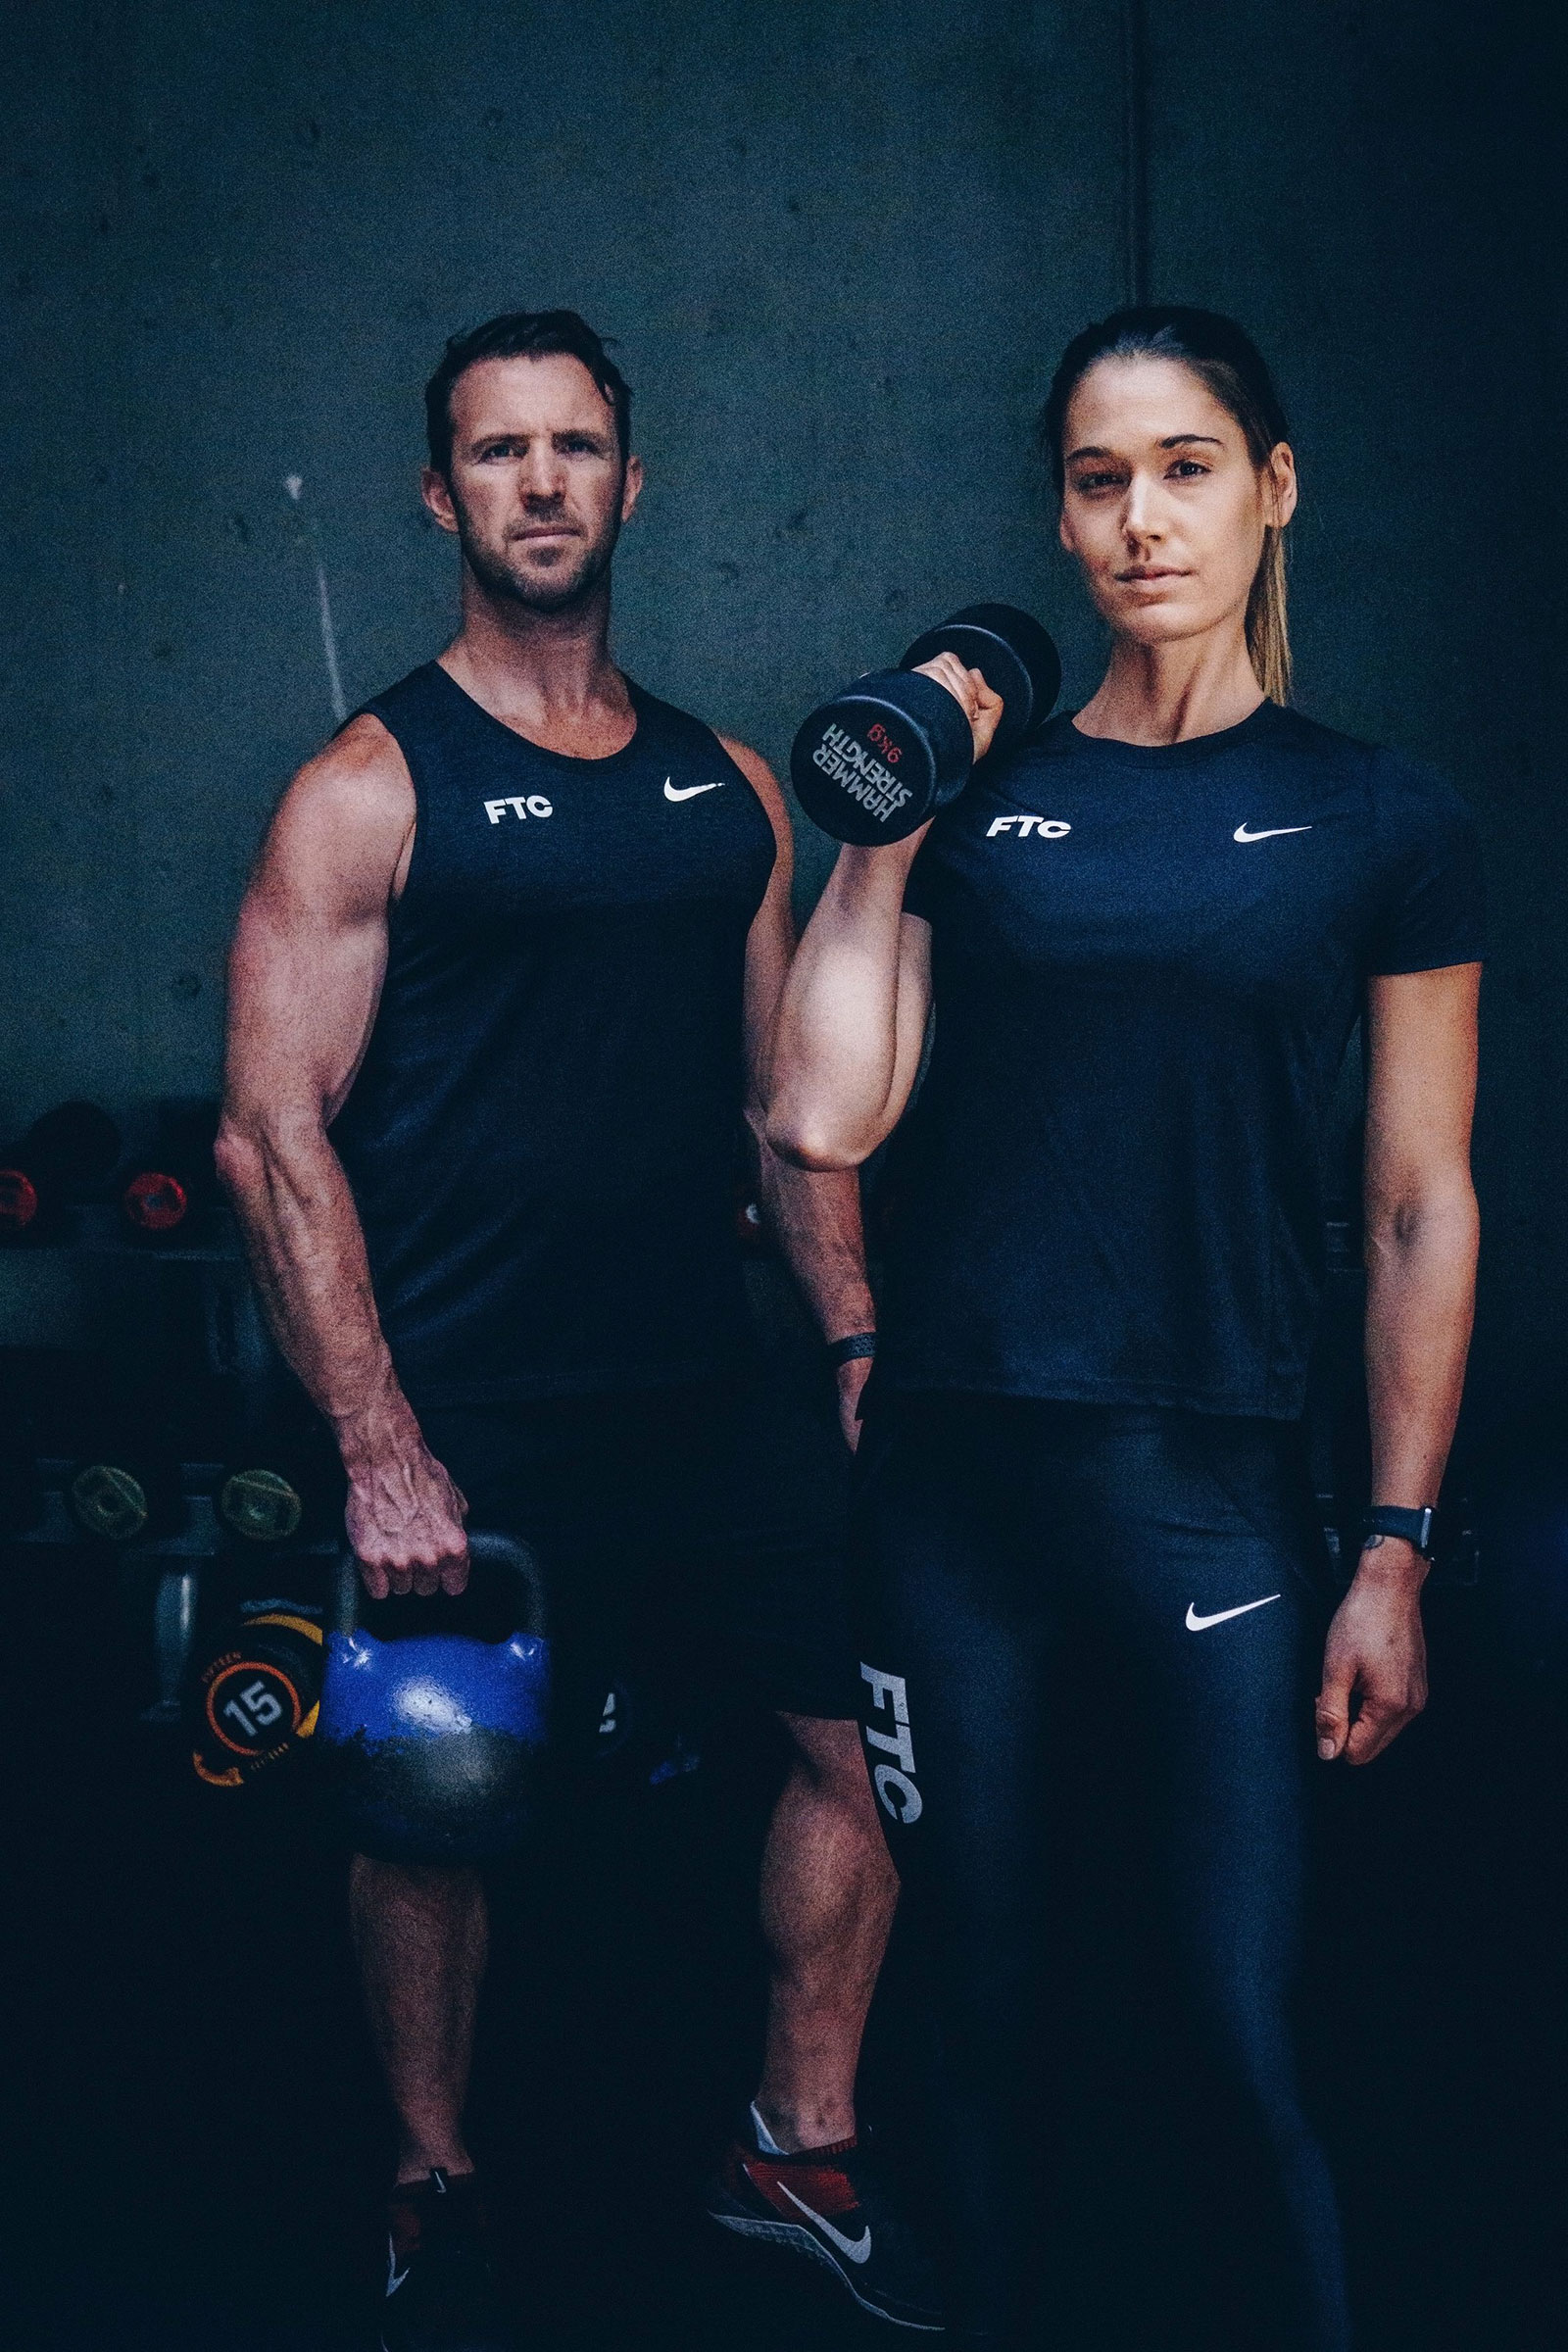 FTC gym photography by Squeeze Creative, Sydney, Surry Hills